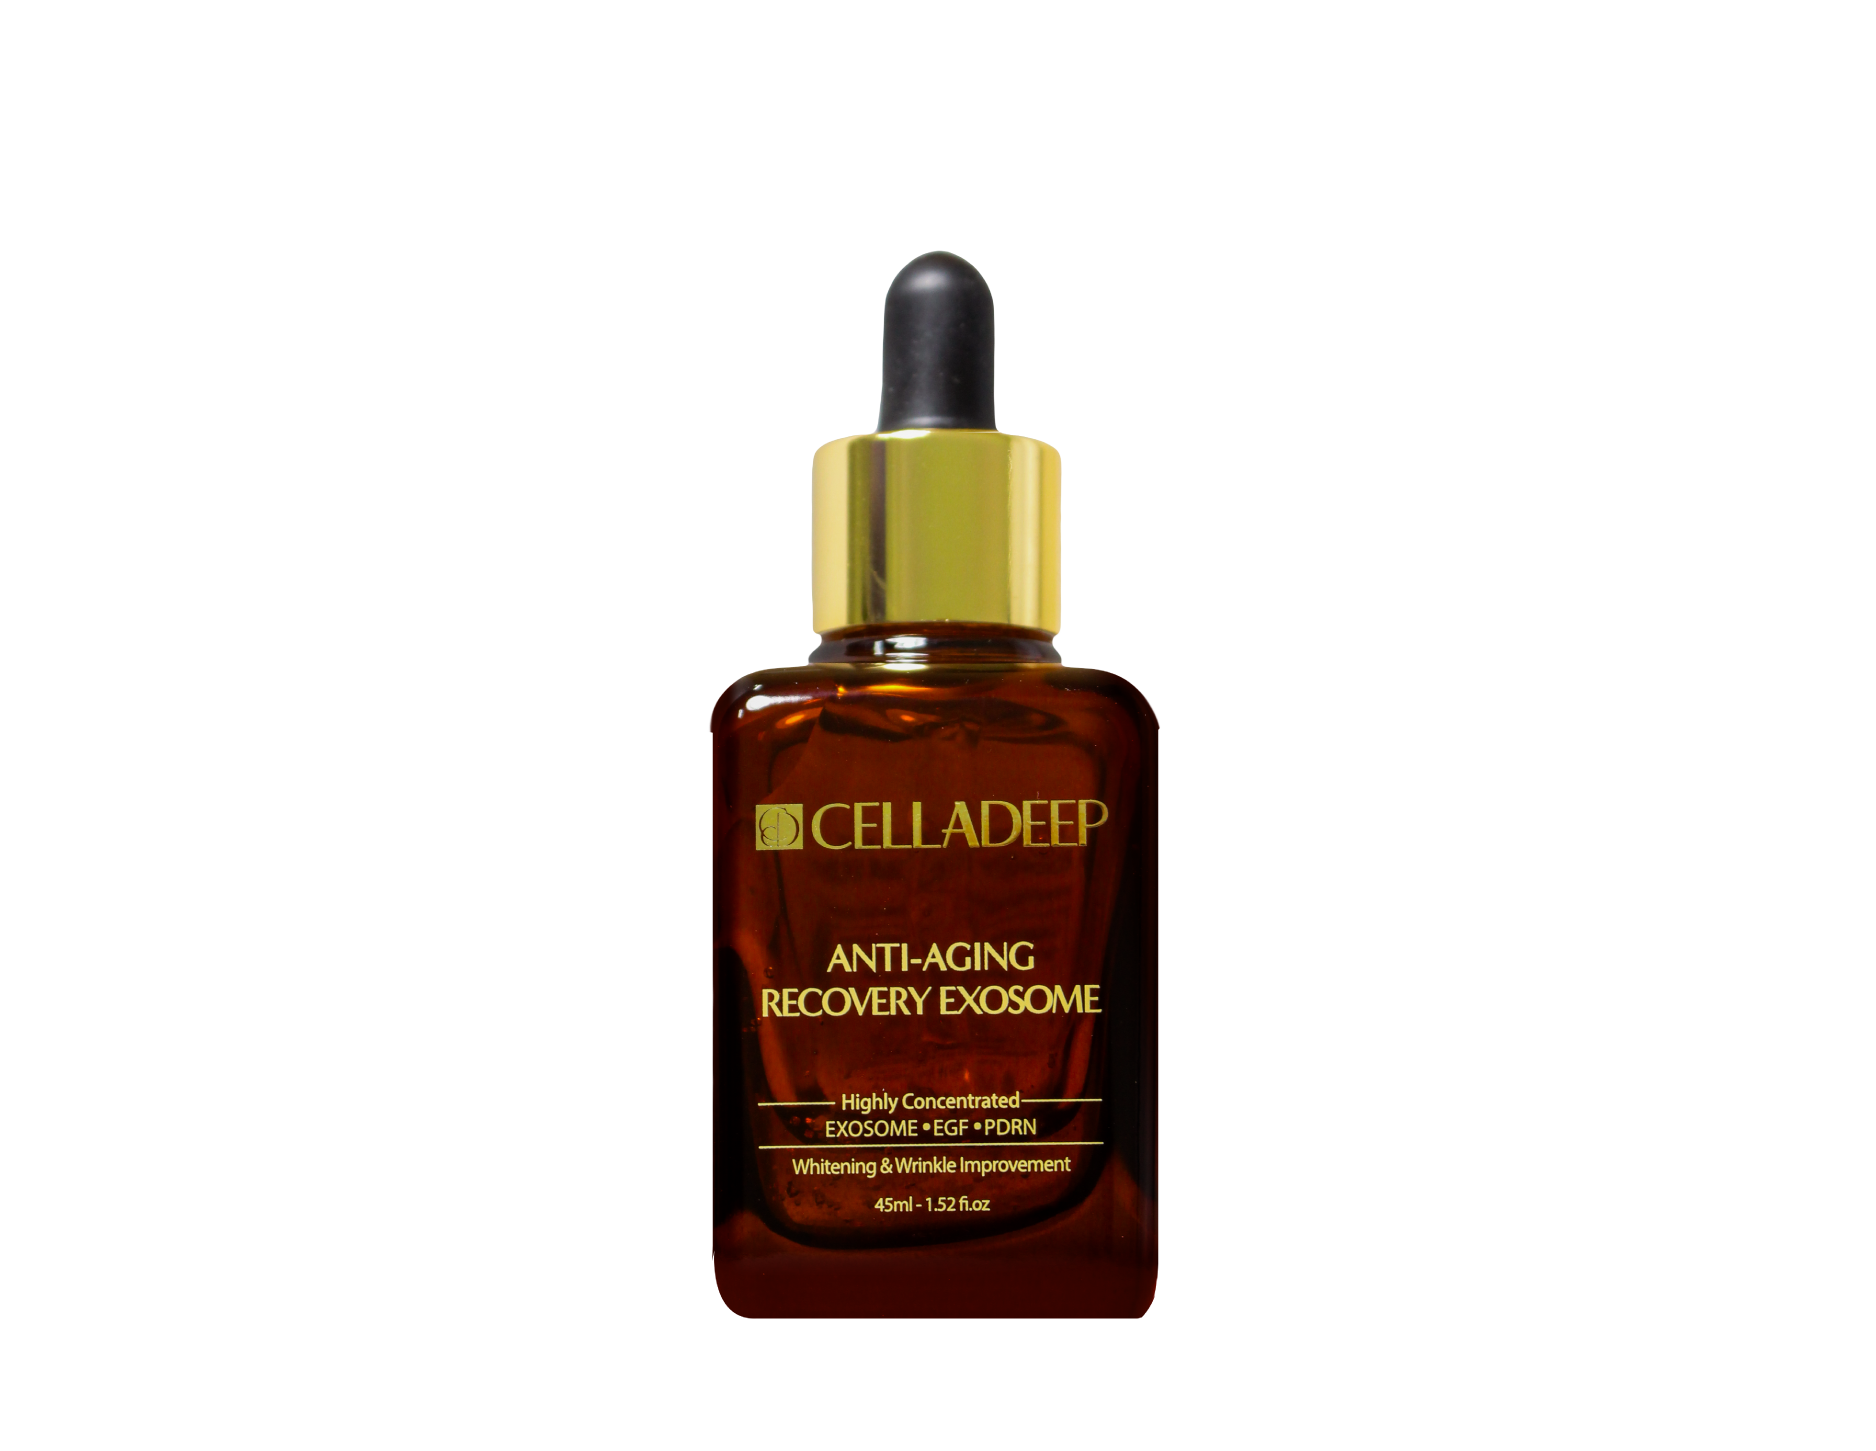 CELLADEEP Anti Aging Recovery Exosome in a dark brown serum bottle with golden cap and black dropper